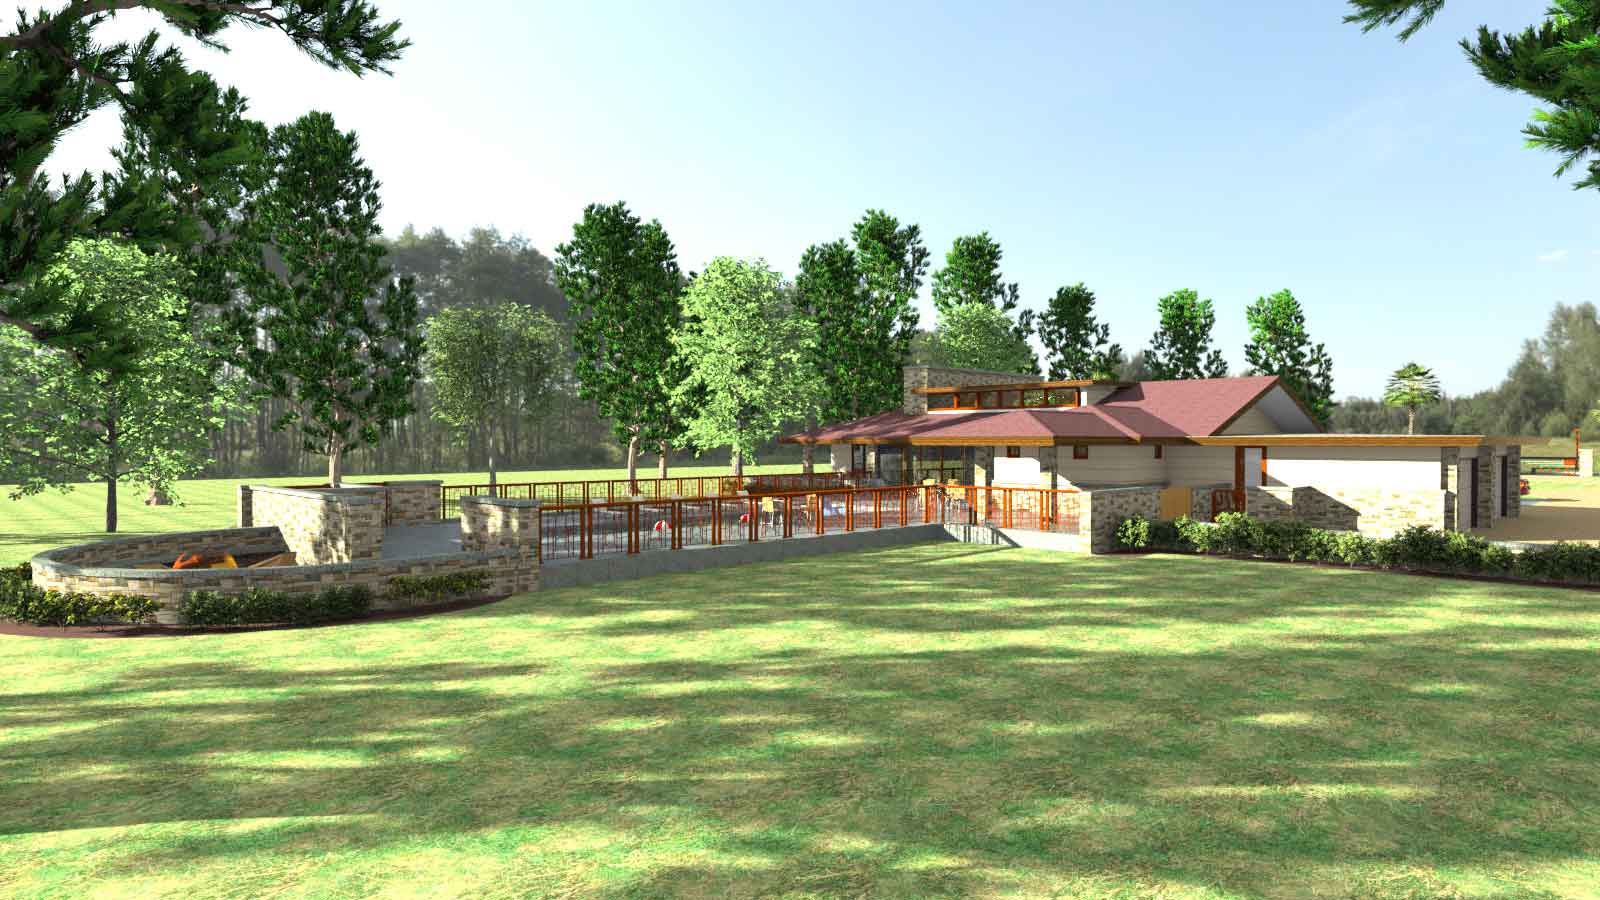 An artist rendering rear view of The Lykos Group’s new Frank Lloyd Wright-inspired custom home in Logan Woods.